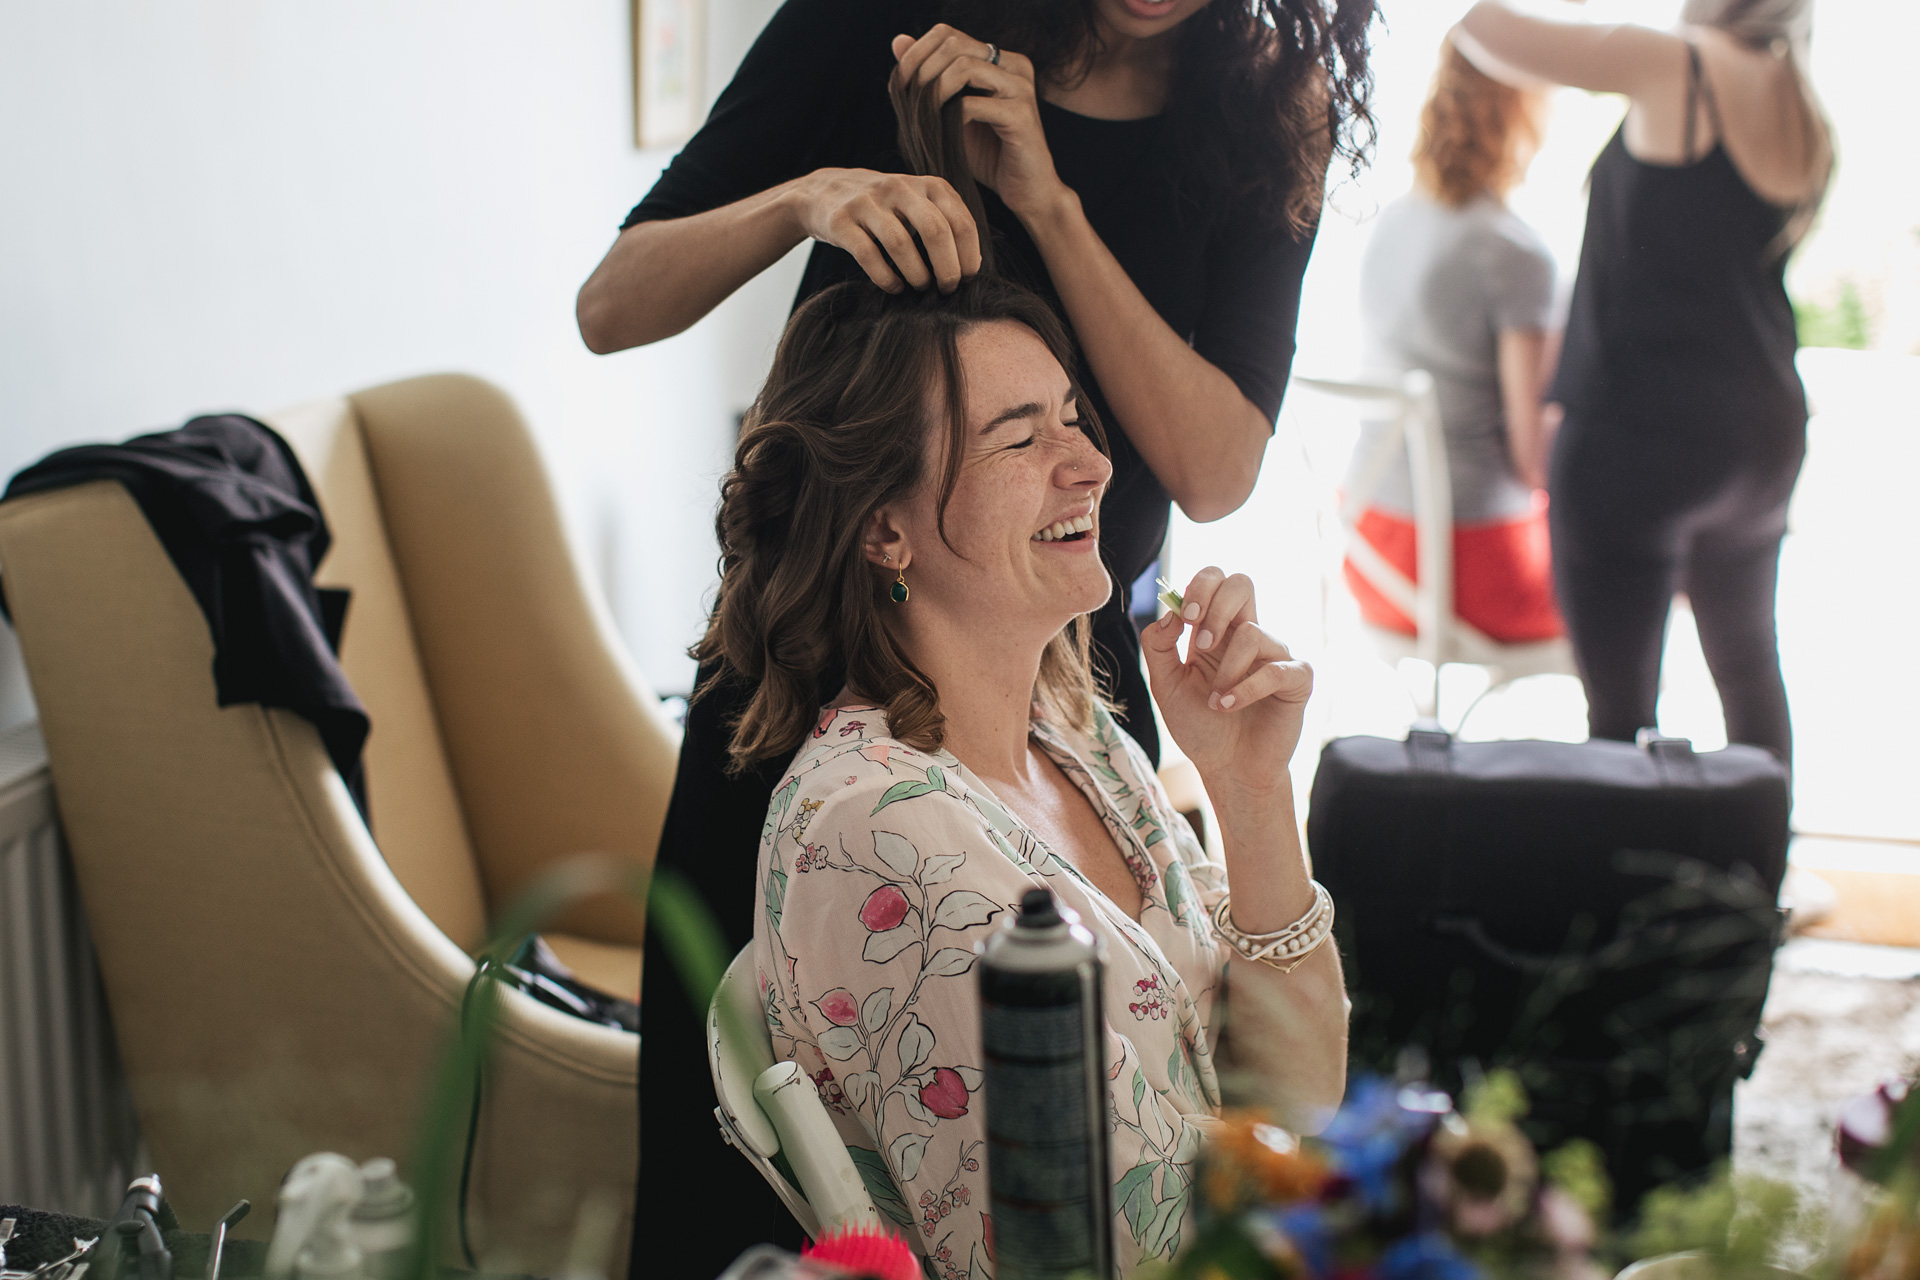 Bride to be, laughing while having hair done